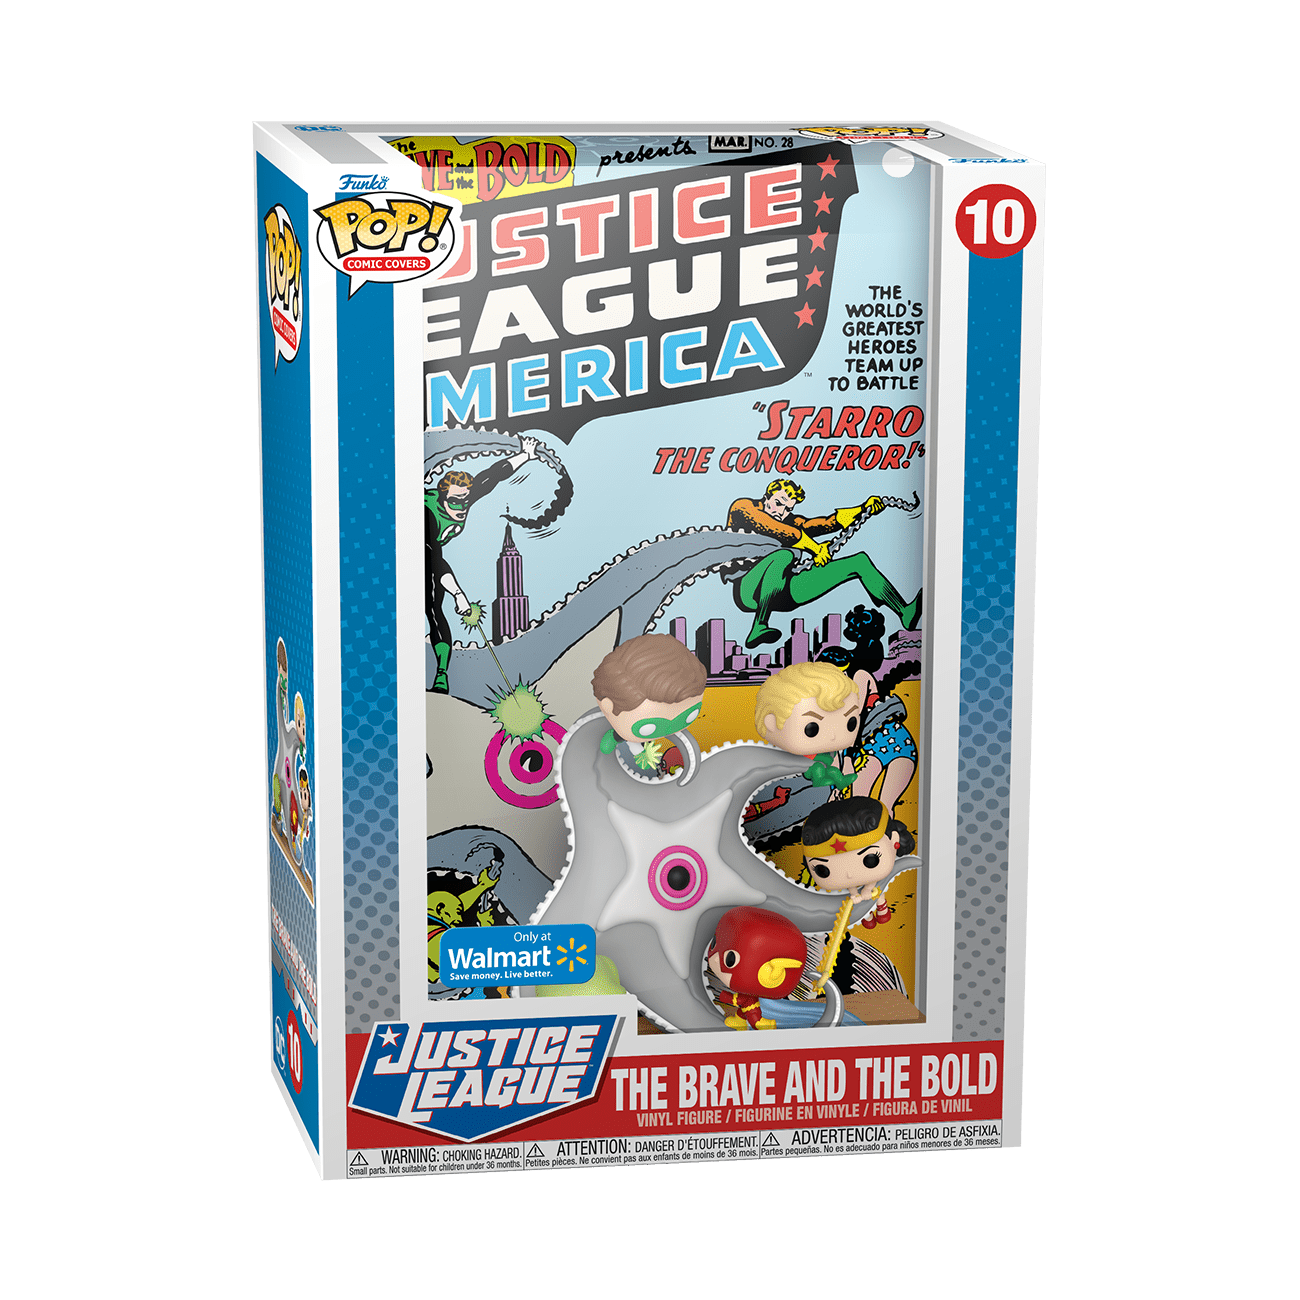 Funko Pop! Comic DC Comic Cover: Justice League - The Brave and the Bold  and Digital Pop!™ NFT Bundle (Walmart Exclusive) 